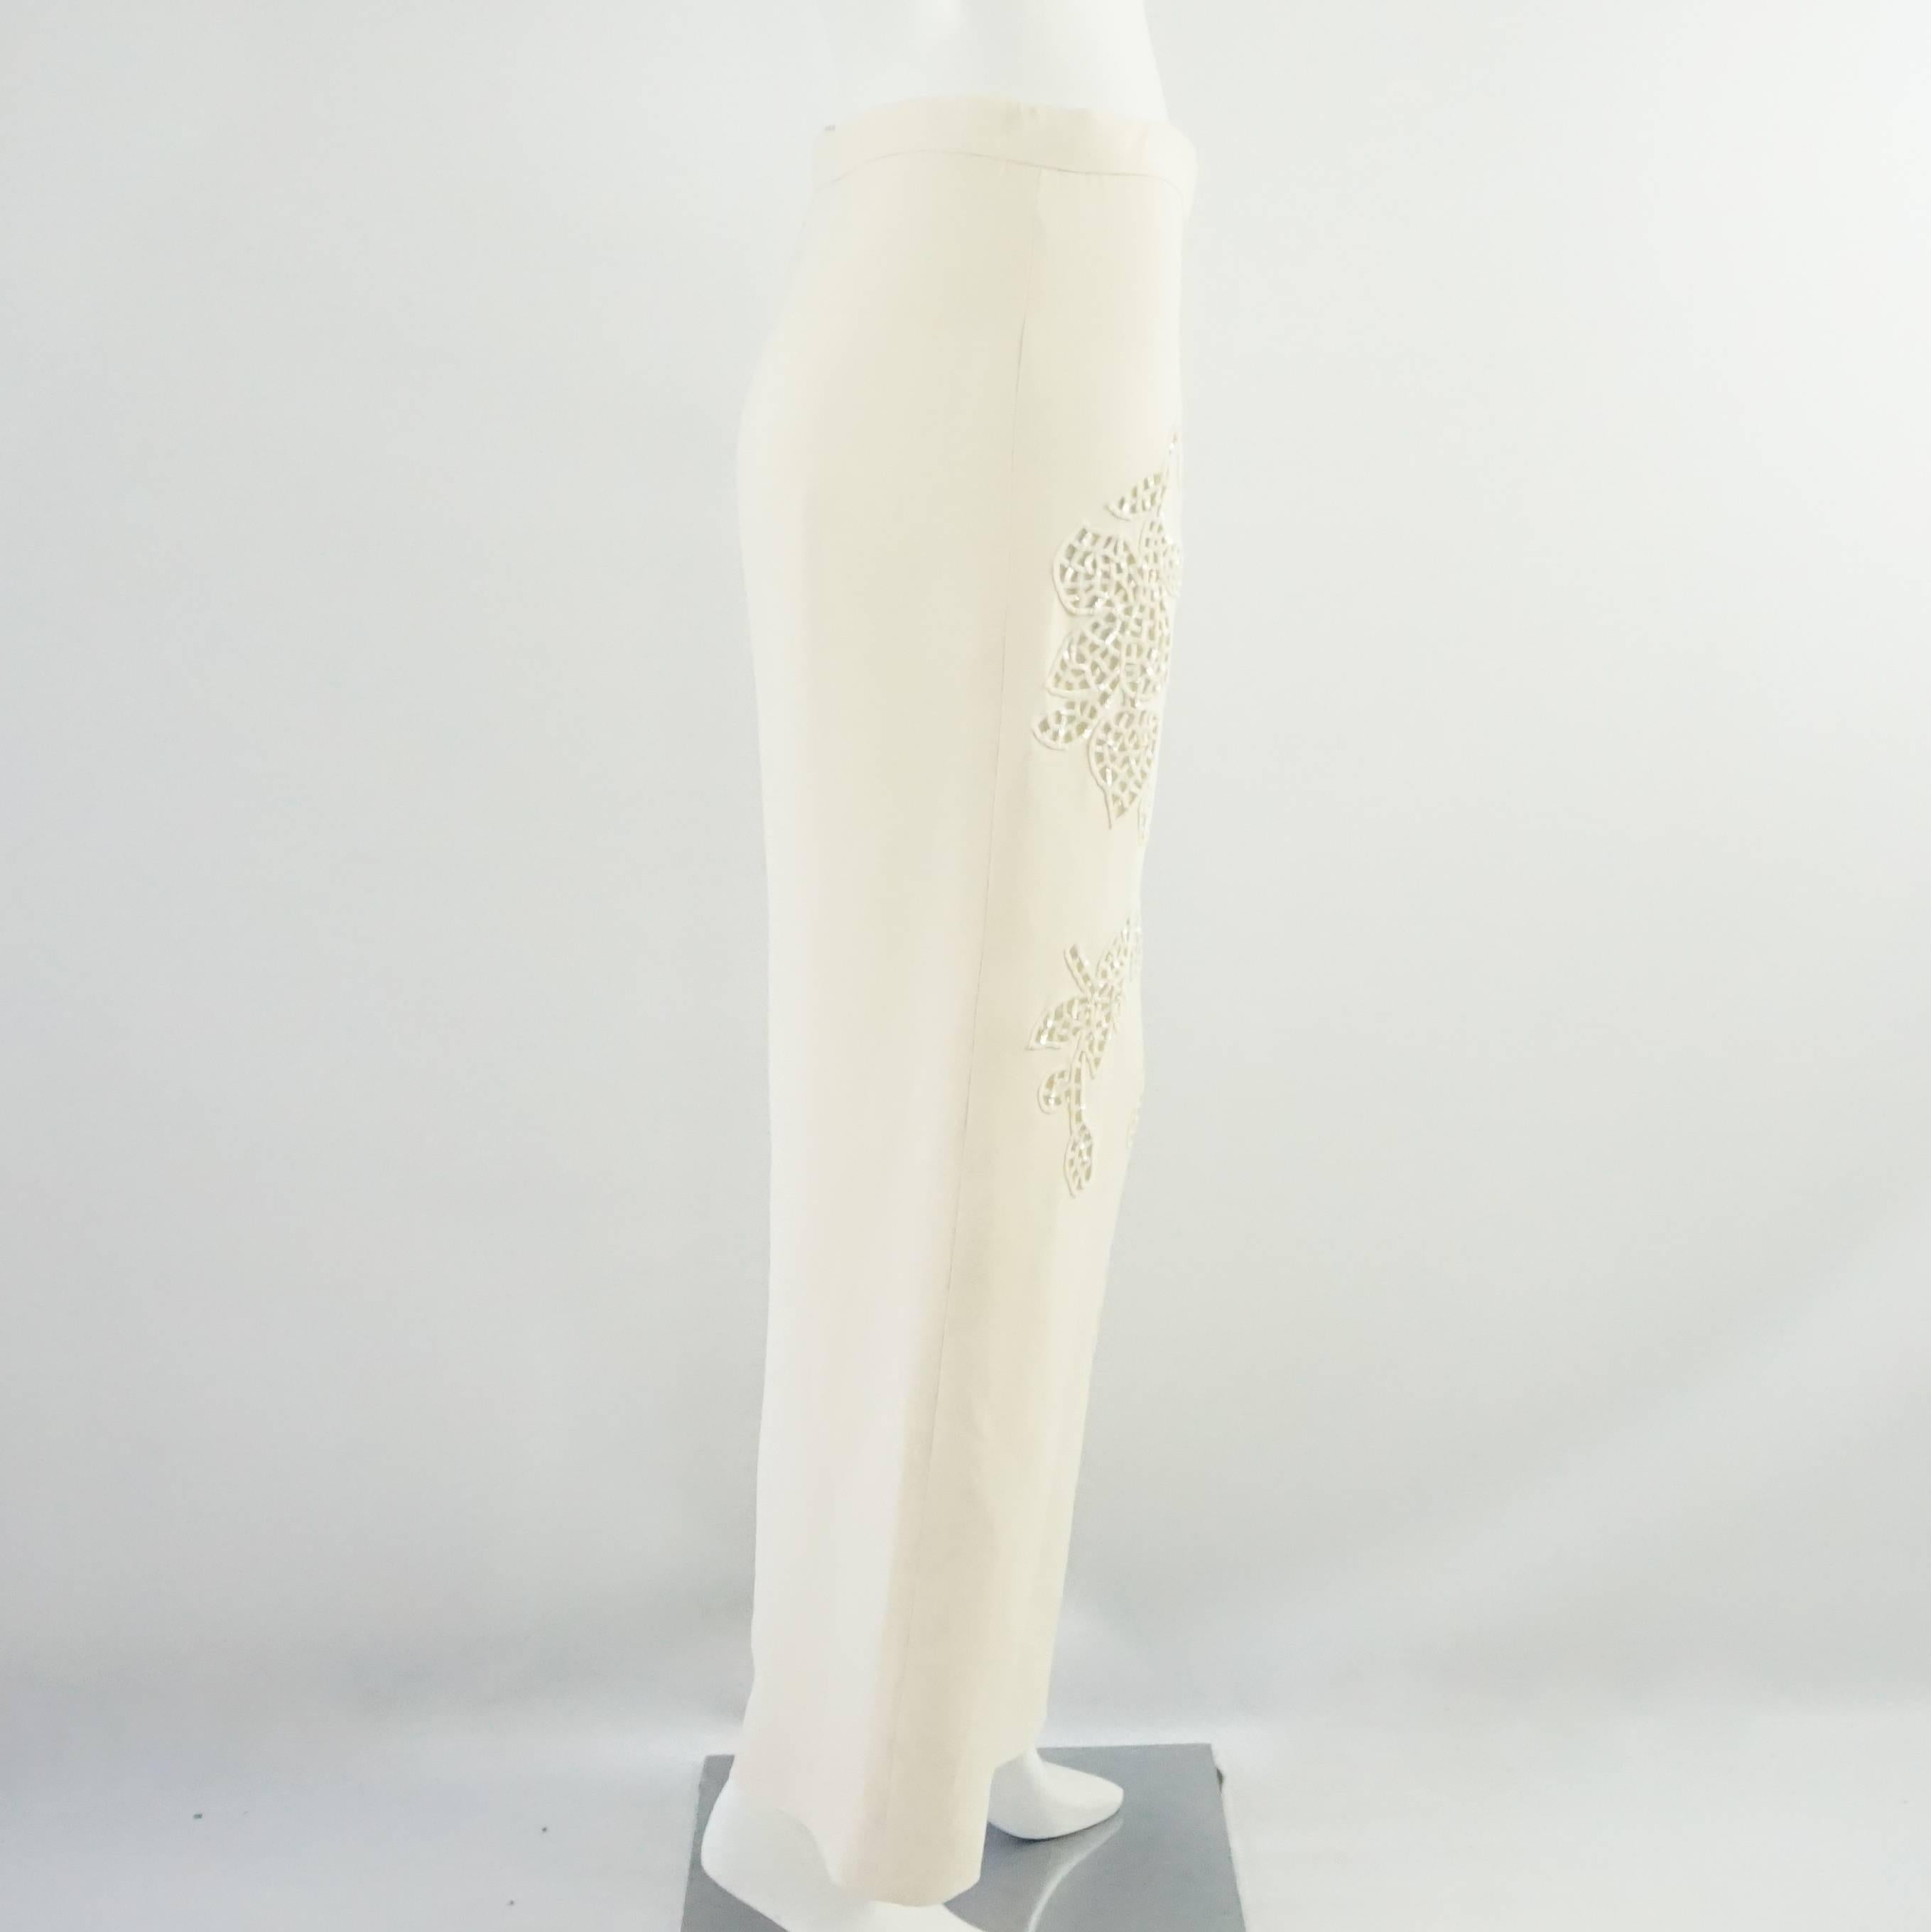 These Giorgio Armani ivory palazzo pants are made of silk and have cutouts with embroidery and sequins attached. The pants are in very good condition with a couple small pulls and minor stains. Size 6. 

Measurements
Waist: 30.5"
Hips: